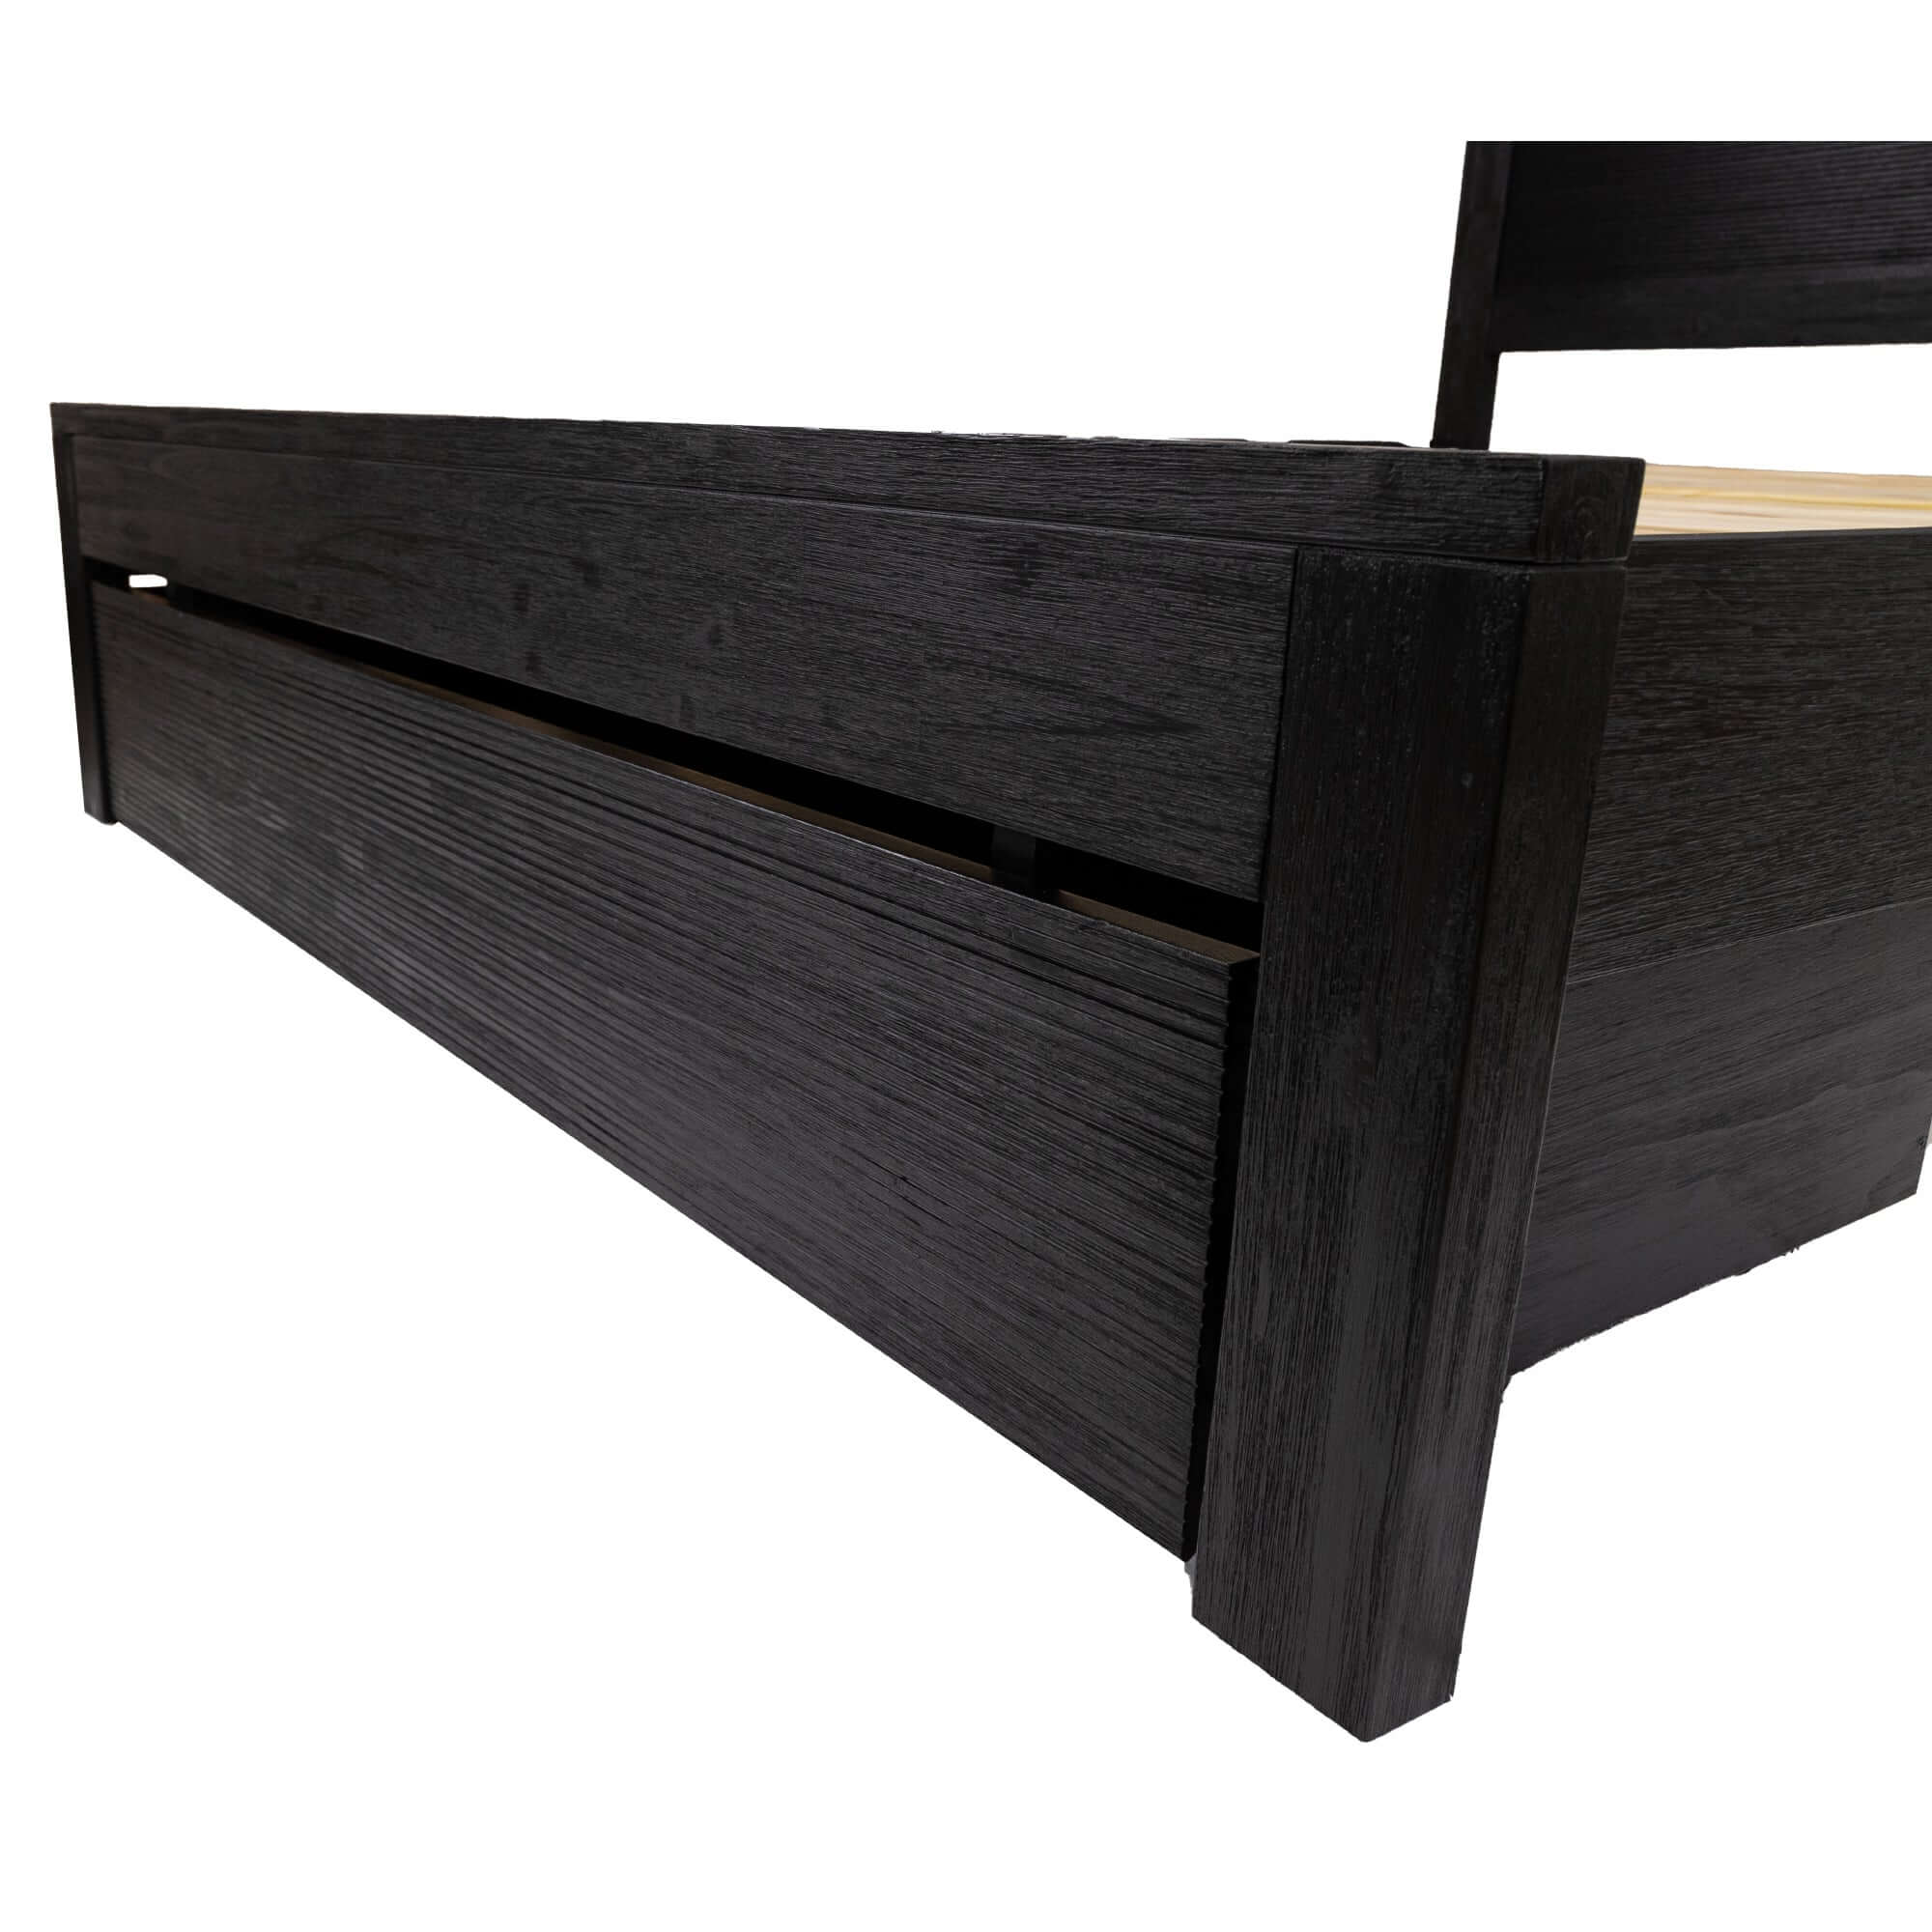 Tofino Bed Frame Queen Size Timber Mattress Base With Storage Drawers - Black-Upinteriors